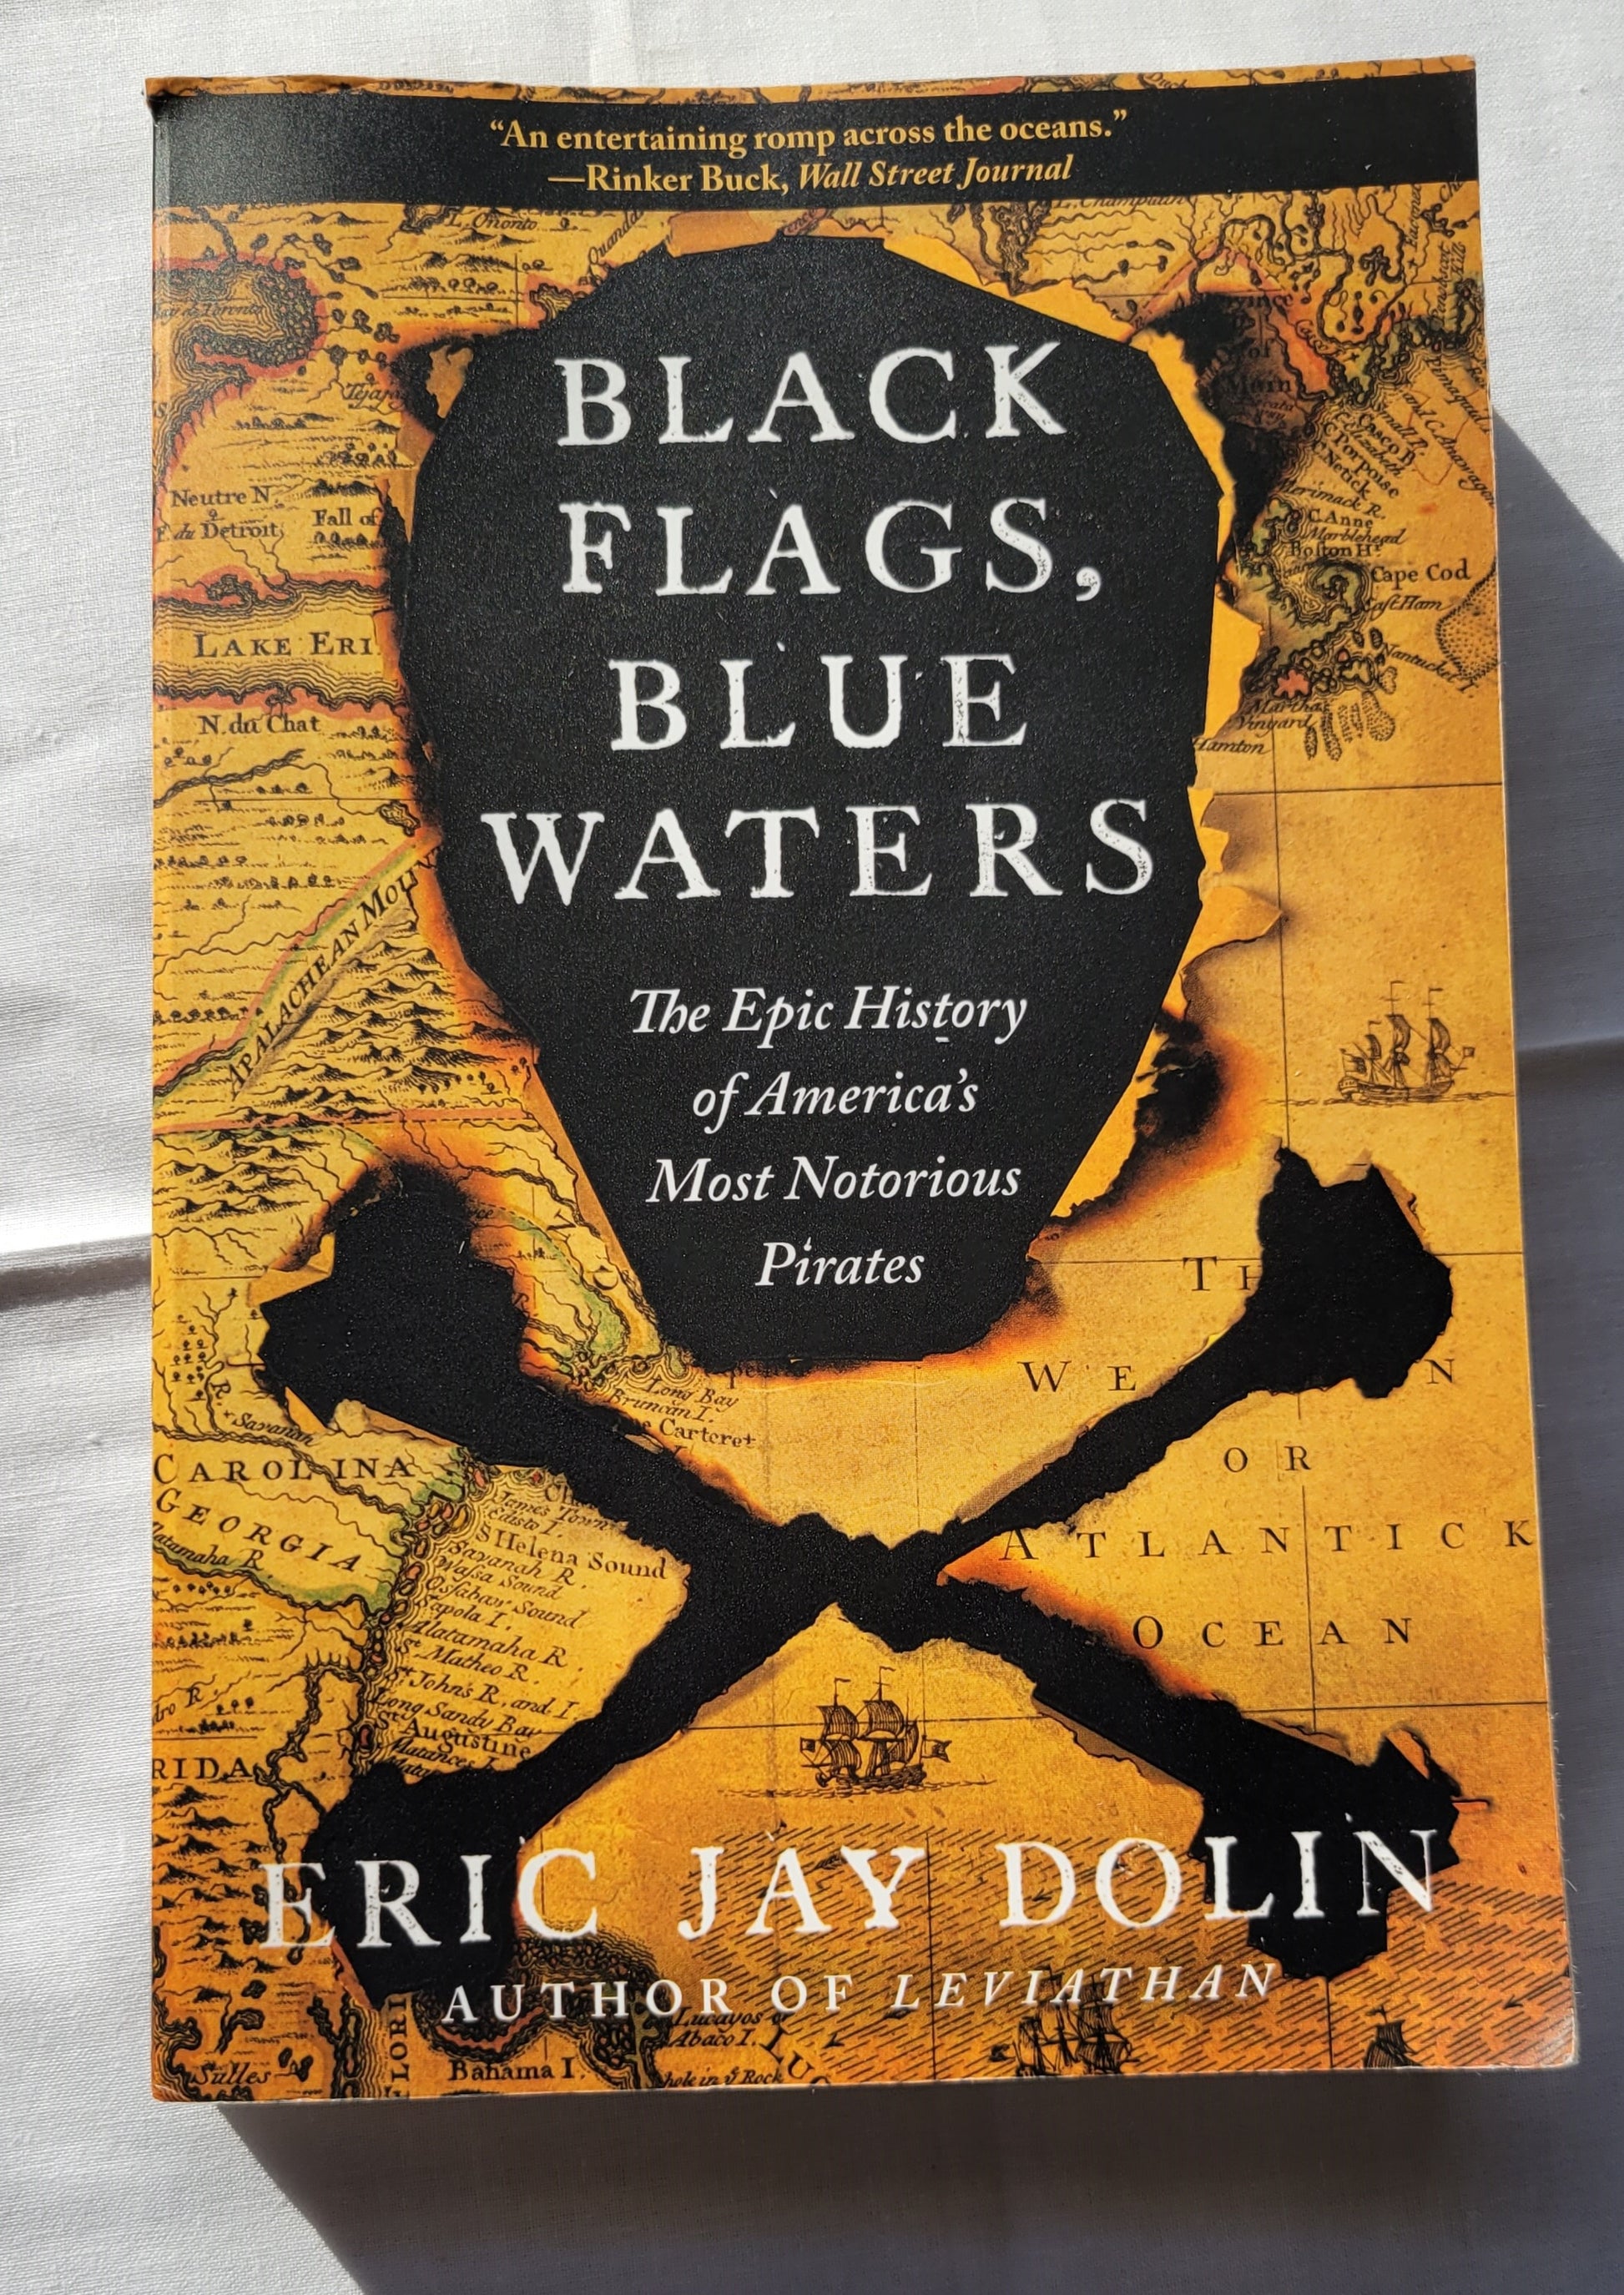 "Black Flags Blue Waters: The Epic History of America's Most Notorious Pirates" by Eric Jay Dolin, published by Liveright in 2018.  "With surprising tales of vicious mutineers, imperial riches, and high-seas intrigue, Black Flags, Blue Waters vividly reanimates the “Golden Age” of piracy in the Americas.  View of front cover.